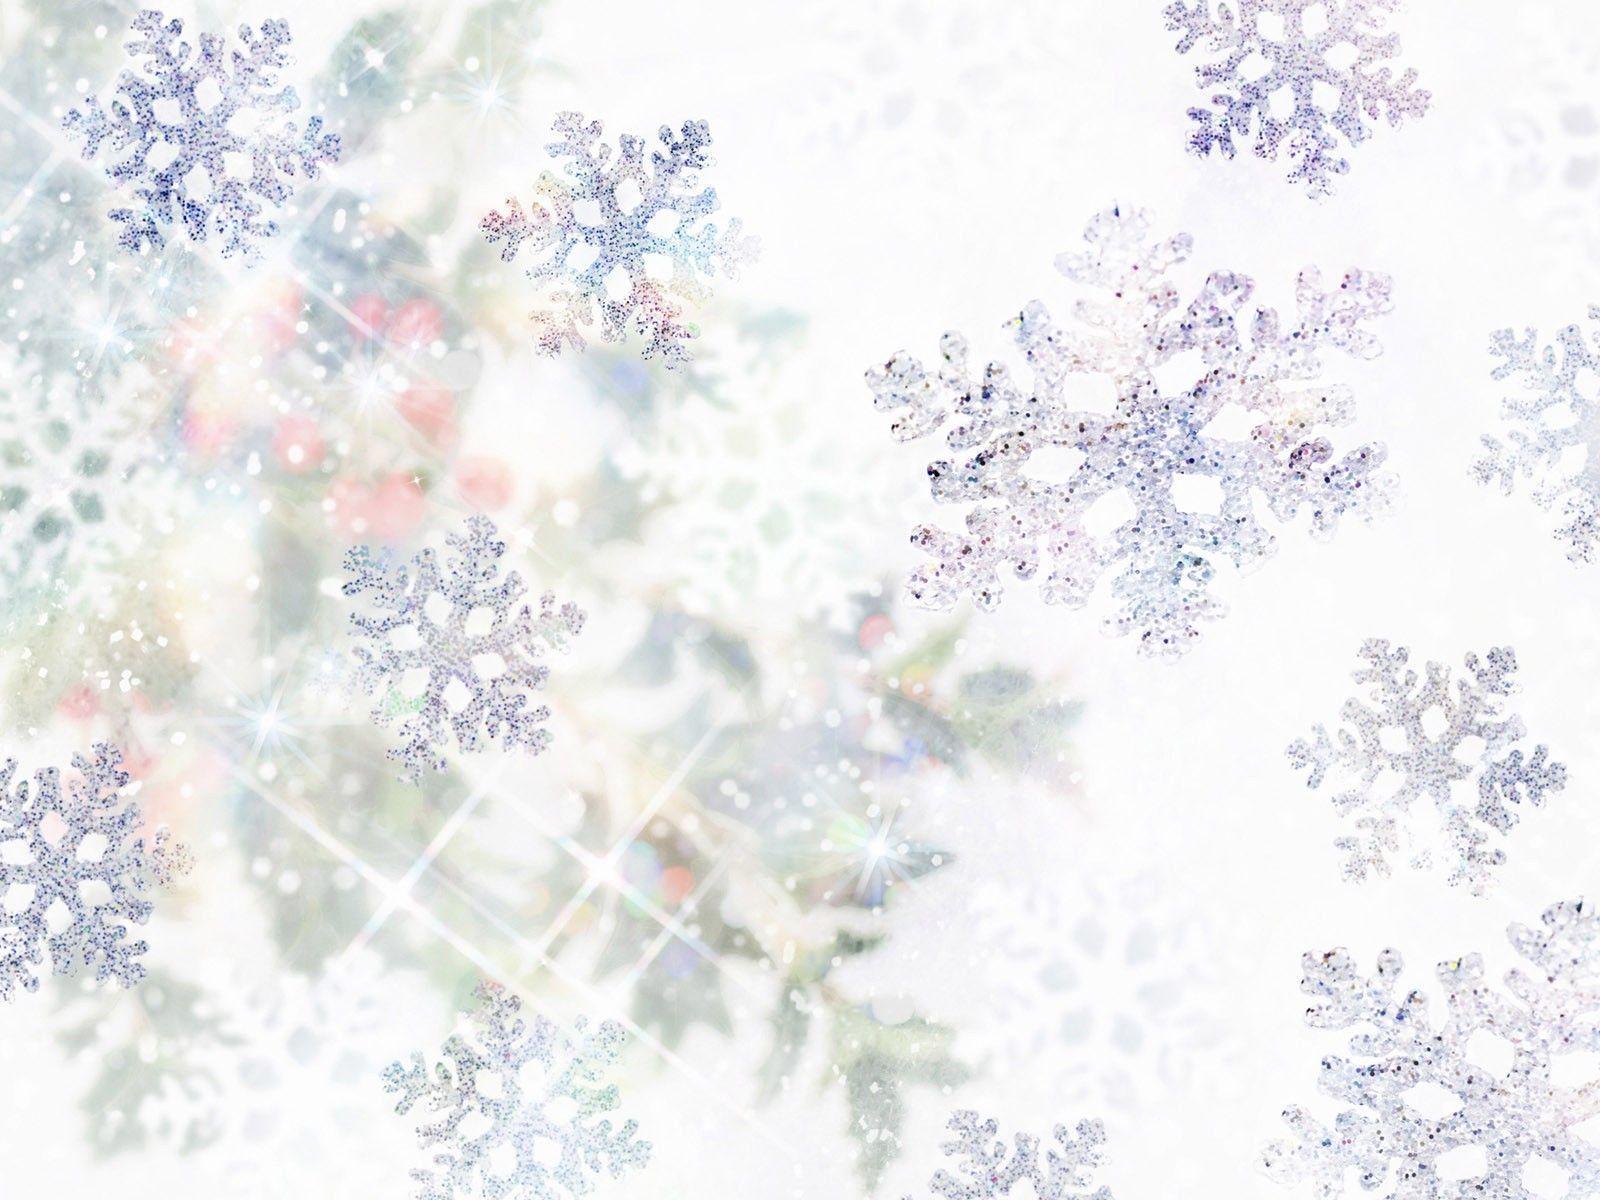 White Christmas Backgrounds Wallpapers Image & Pictures